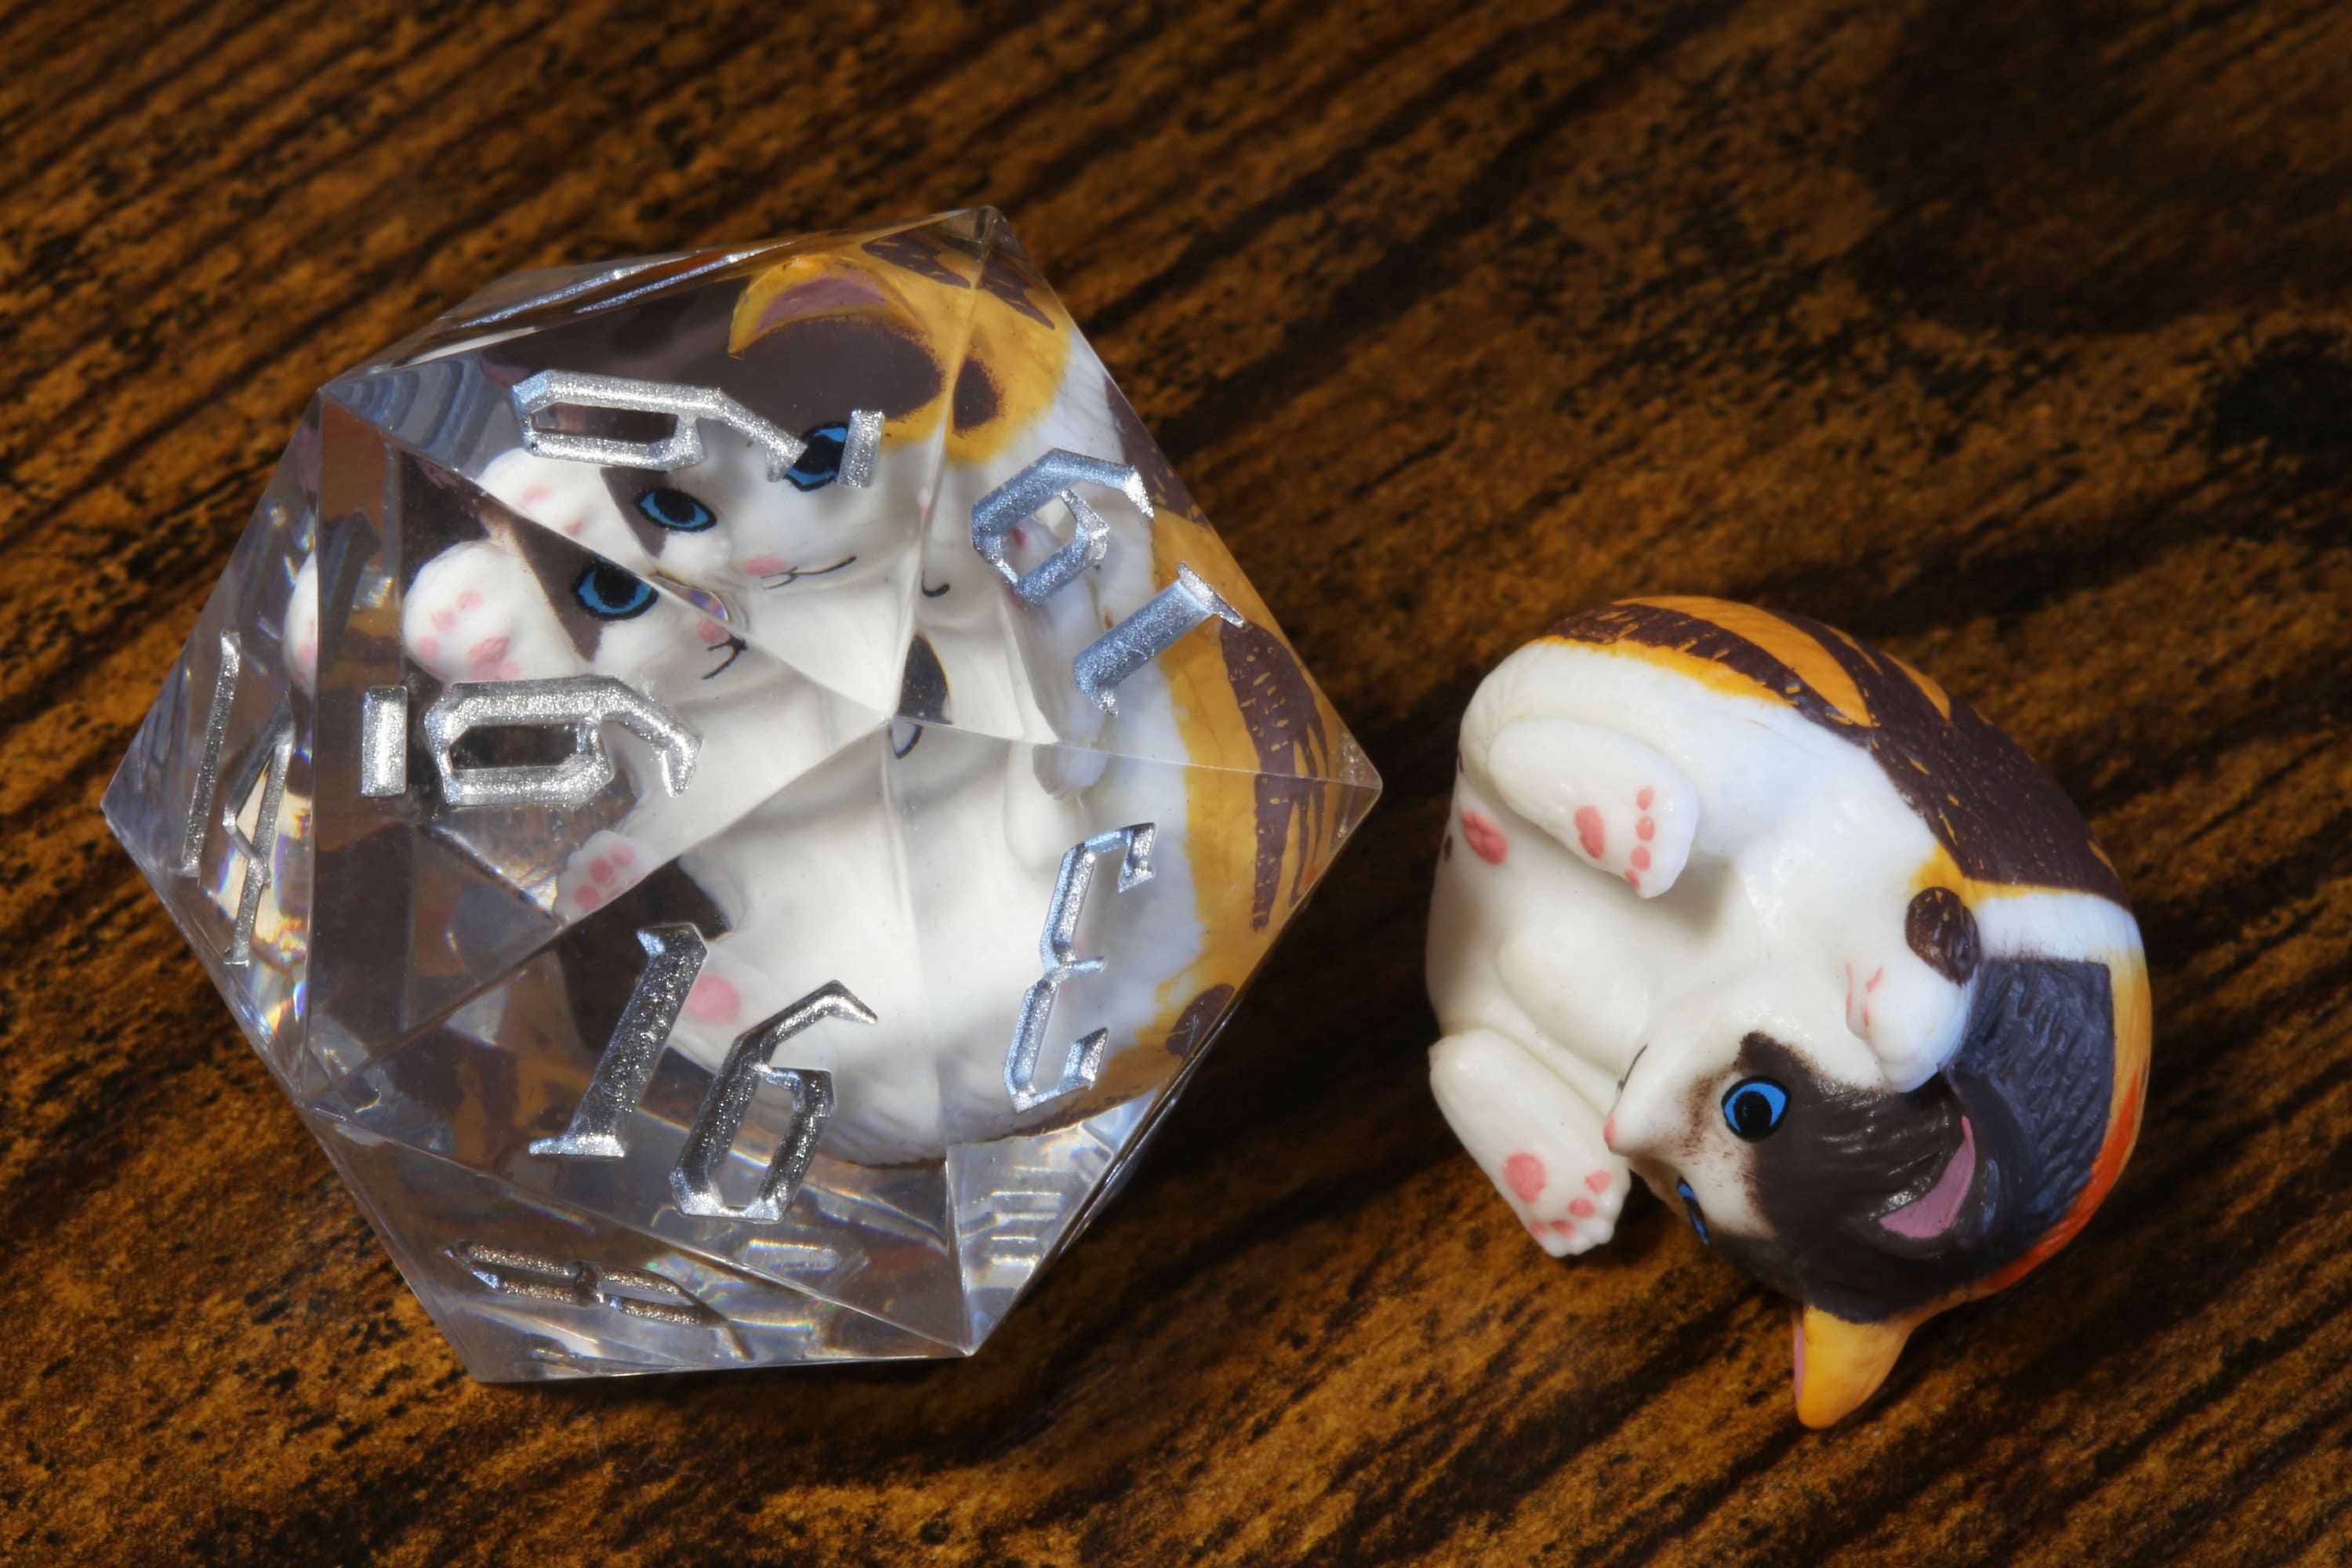 Calico Kitty D20 - Large D20 with kitten inside - The Wizard's Vault